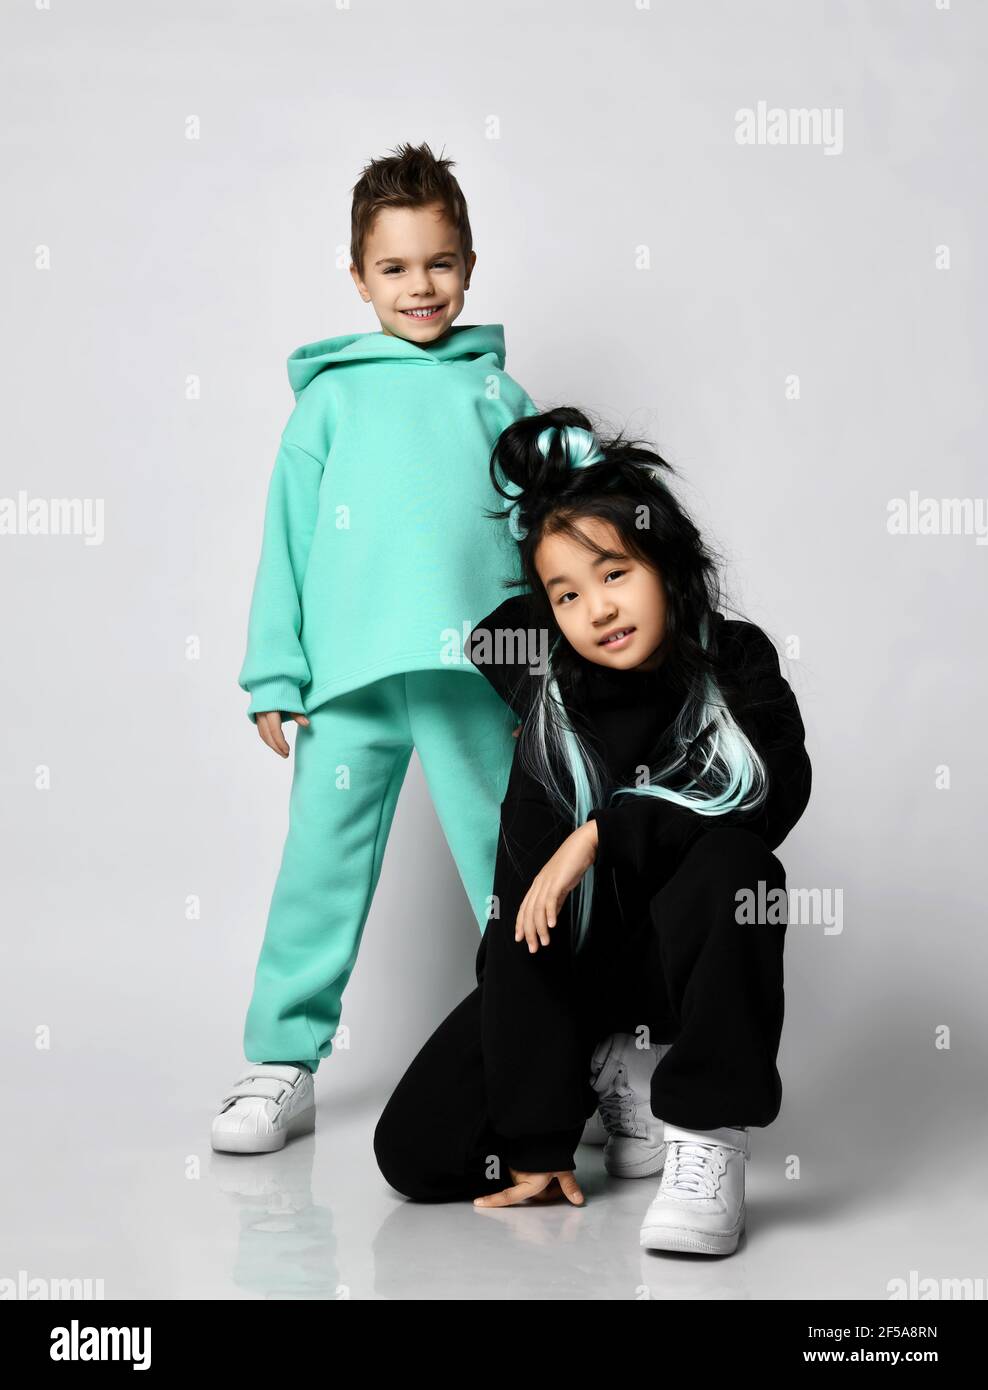 Friends at playground. Kid girl in black hoodie and pants sits squatted at kid boy standing in green, mint sports suit Stock Photo